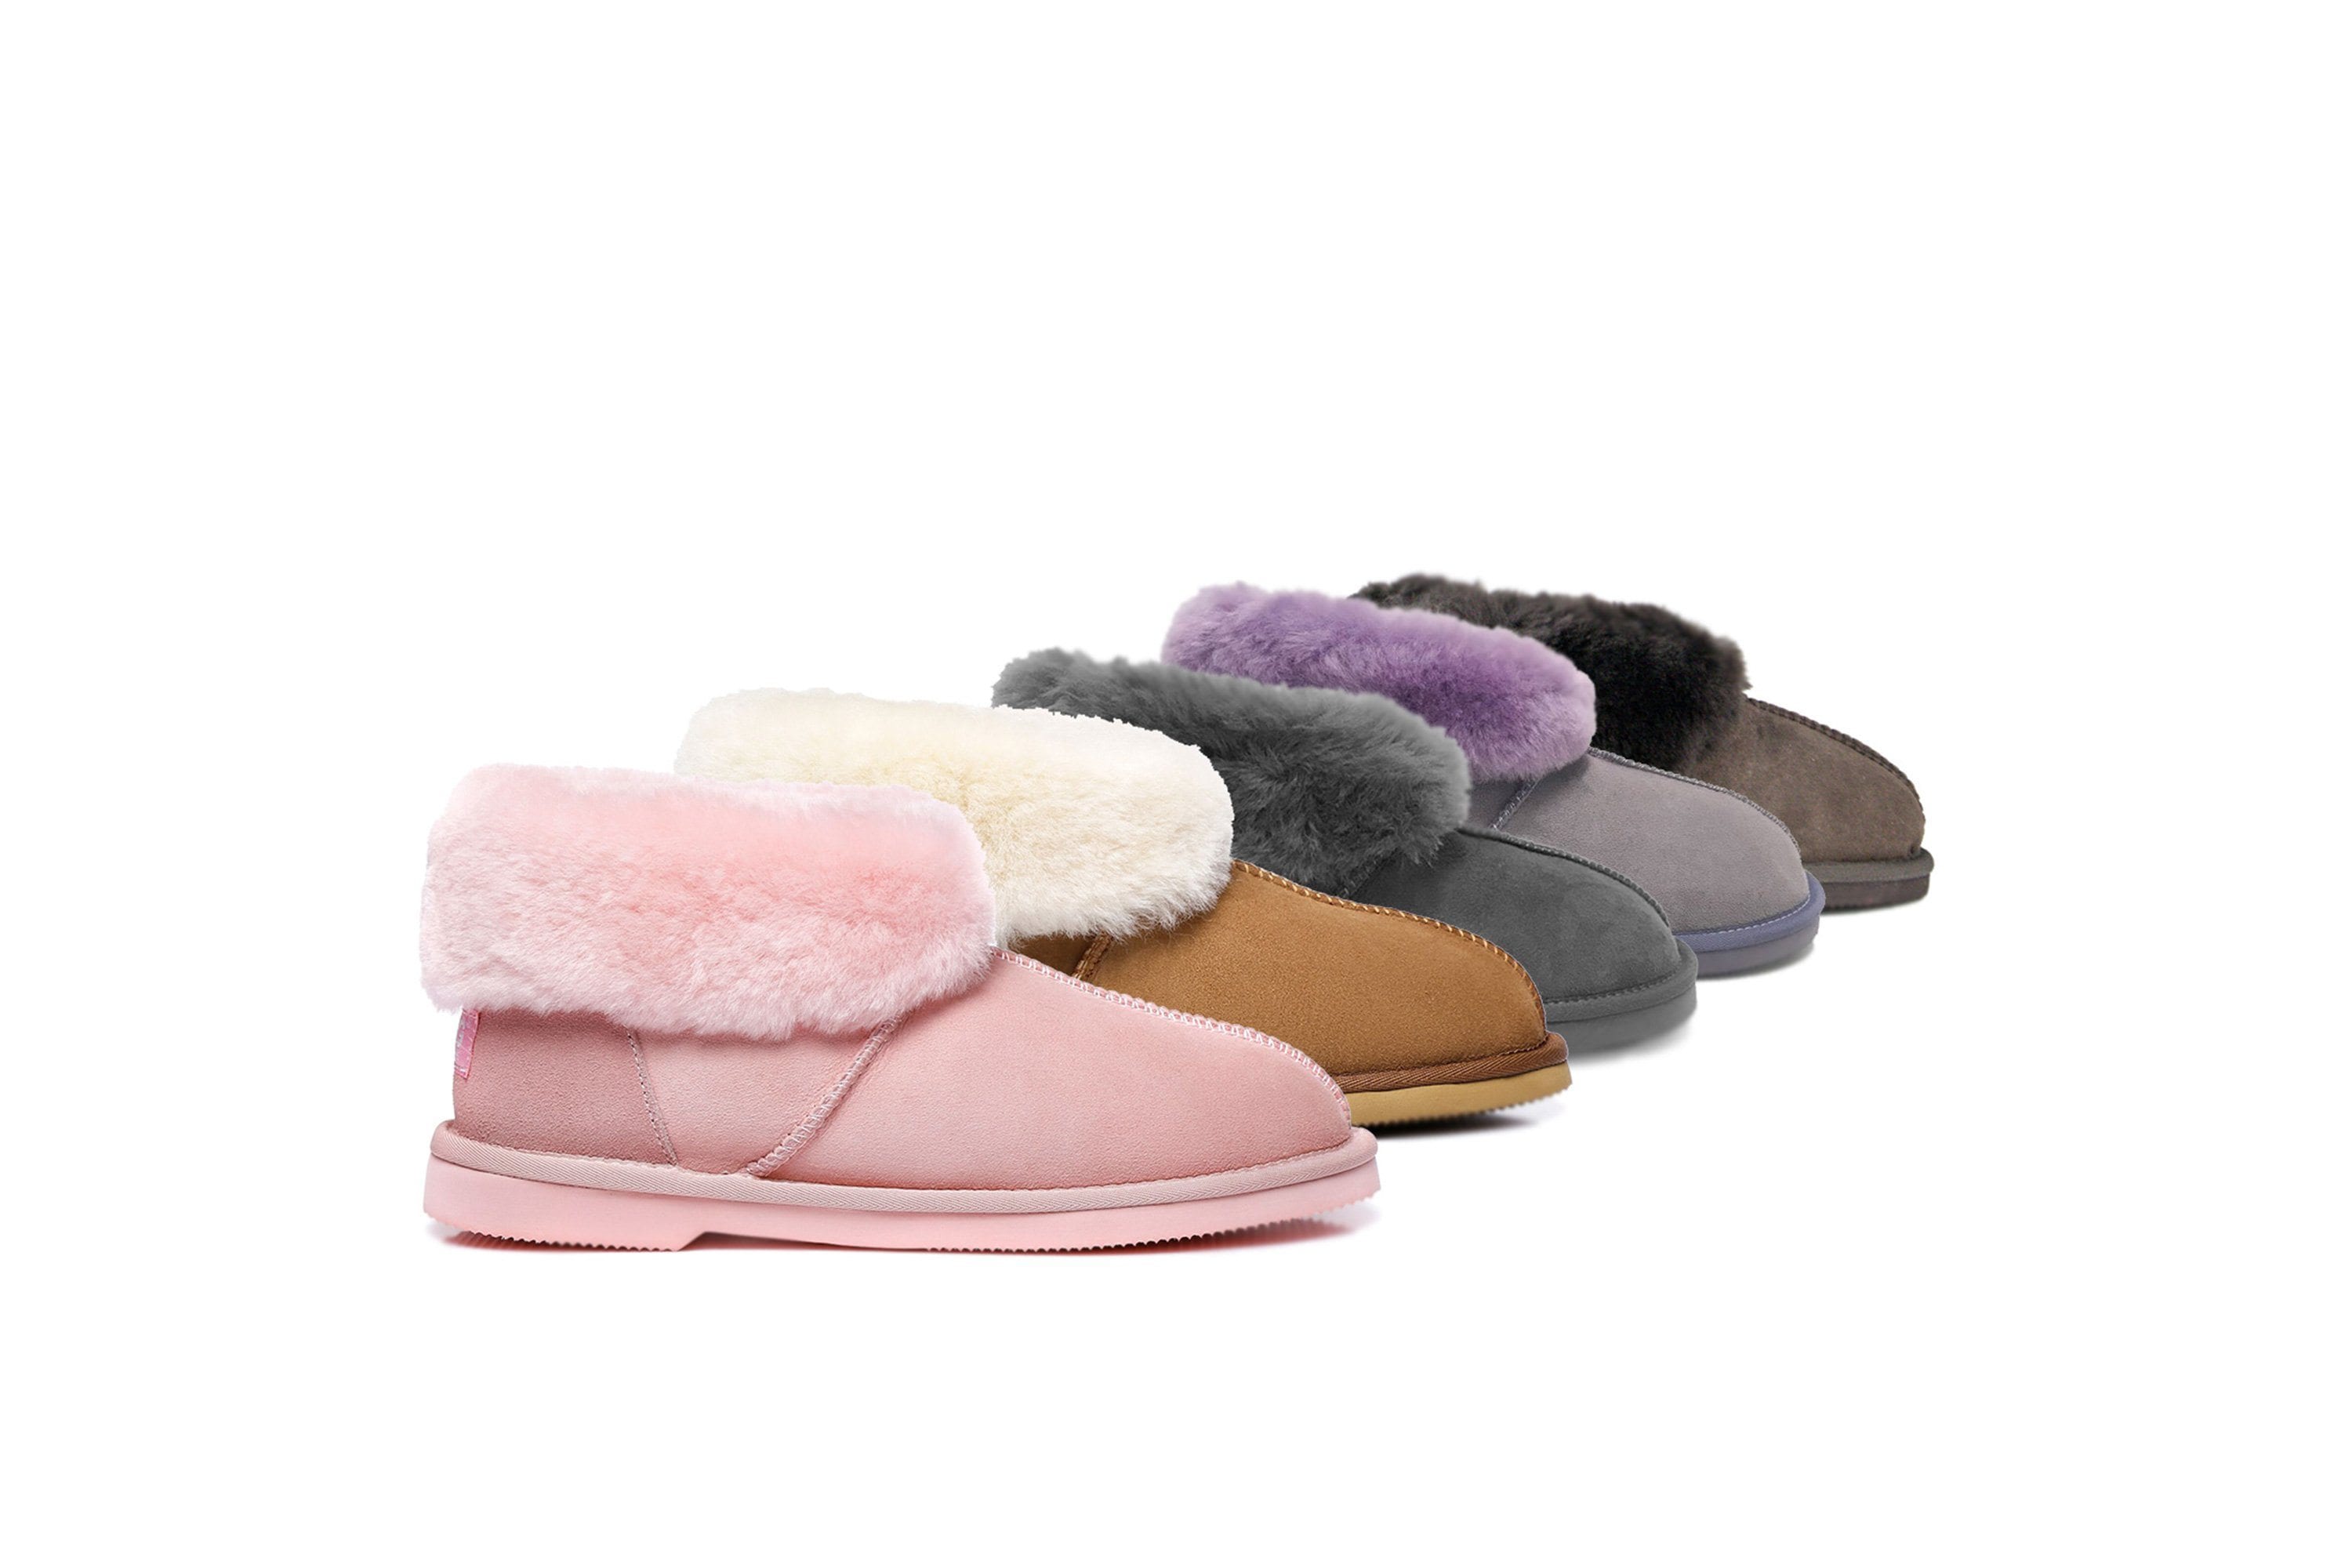 EVER UGG Mallow Slippers #11612 /Scuffs 